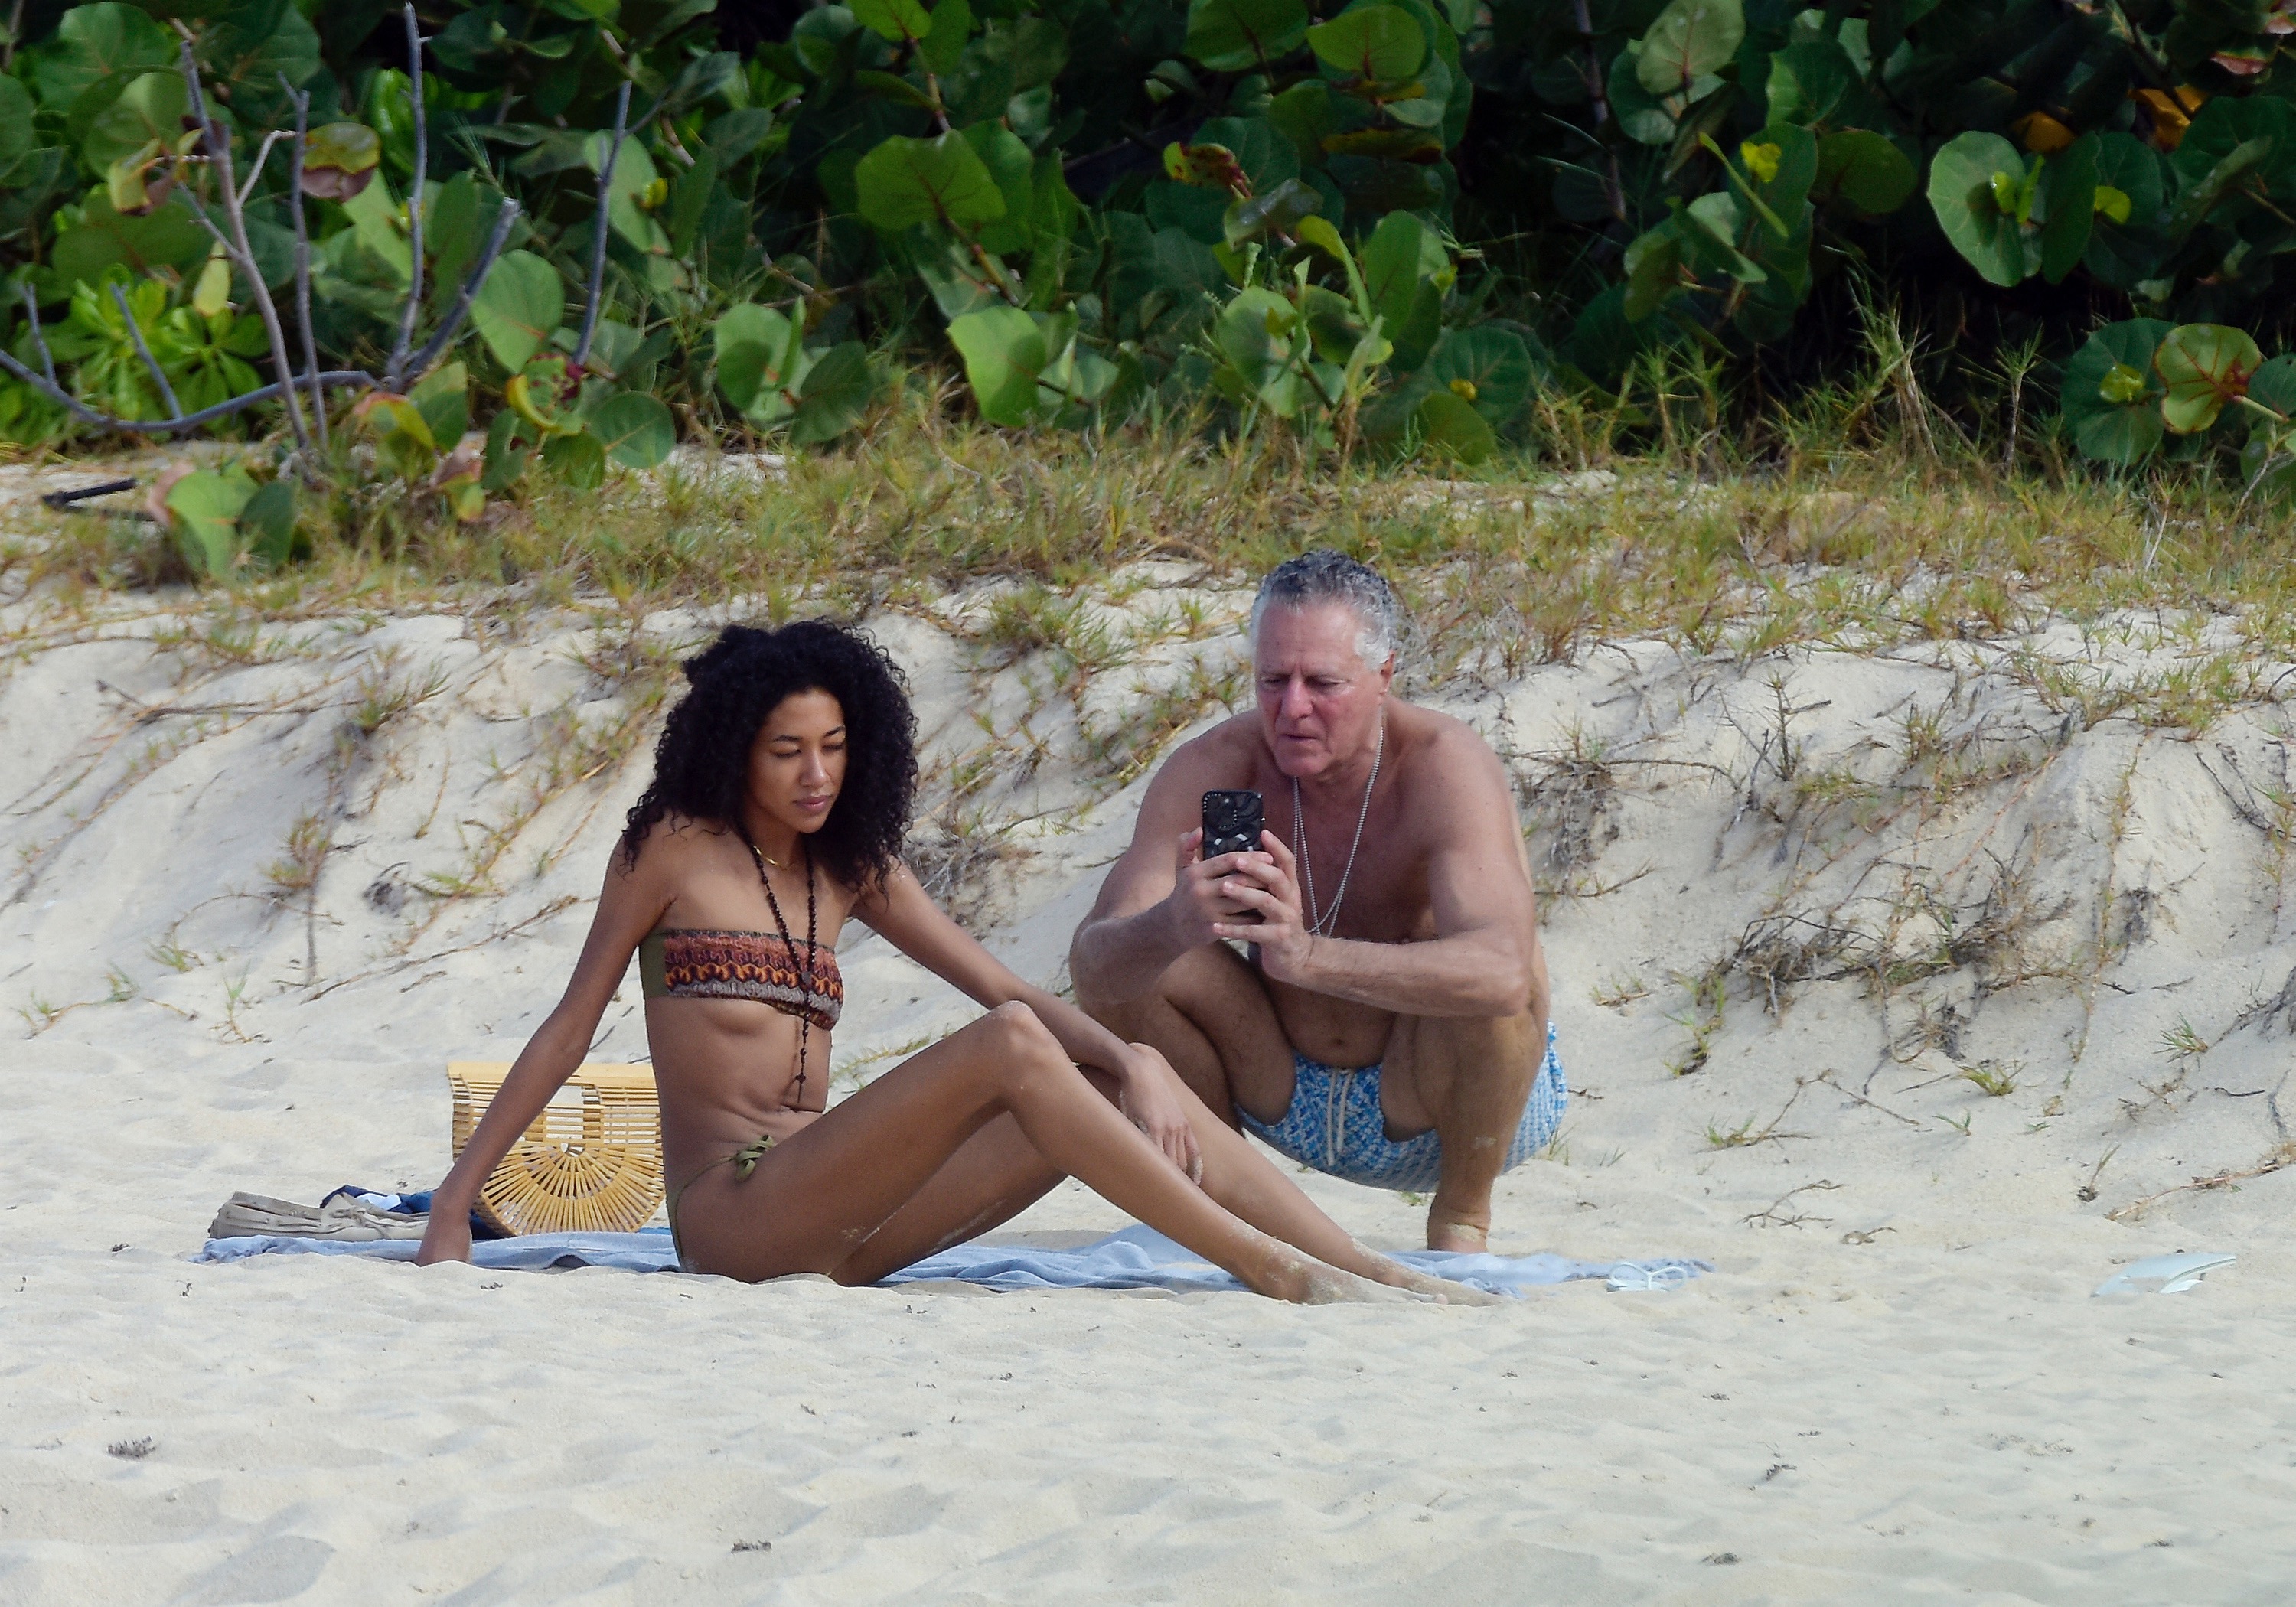 Aoki Lee Simmons, 21, kisses Vittorio Assaf, 65, in St. Barts